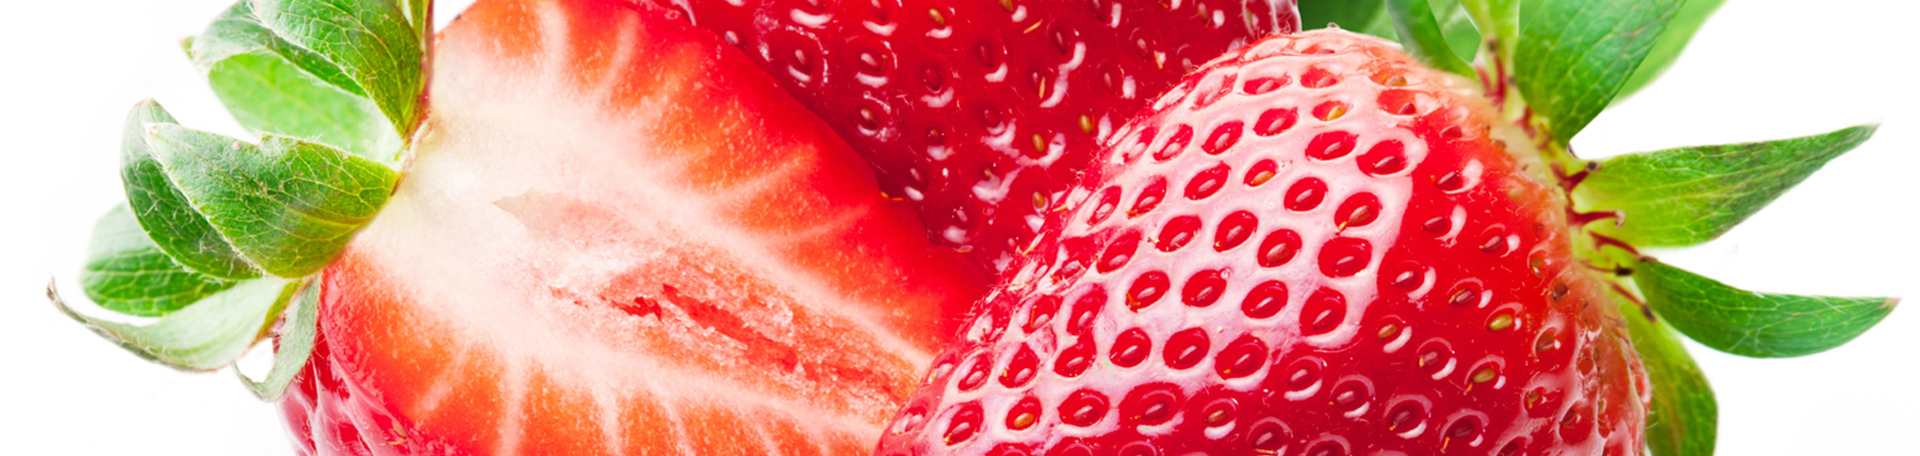 Baton Rouge chiropractic nutrition tip of the month: enjoy strawberries!